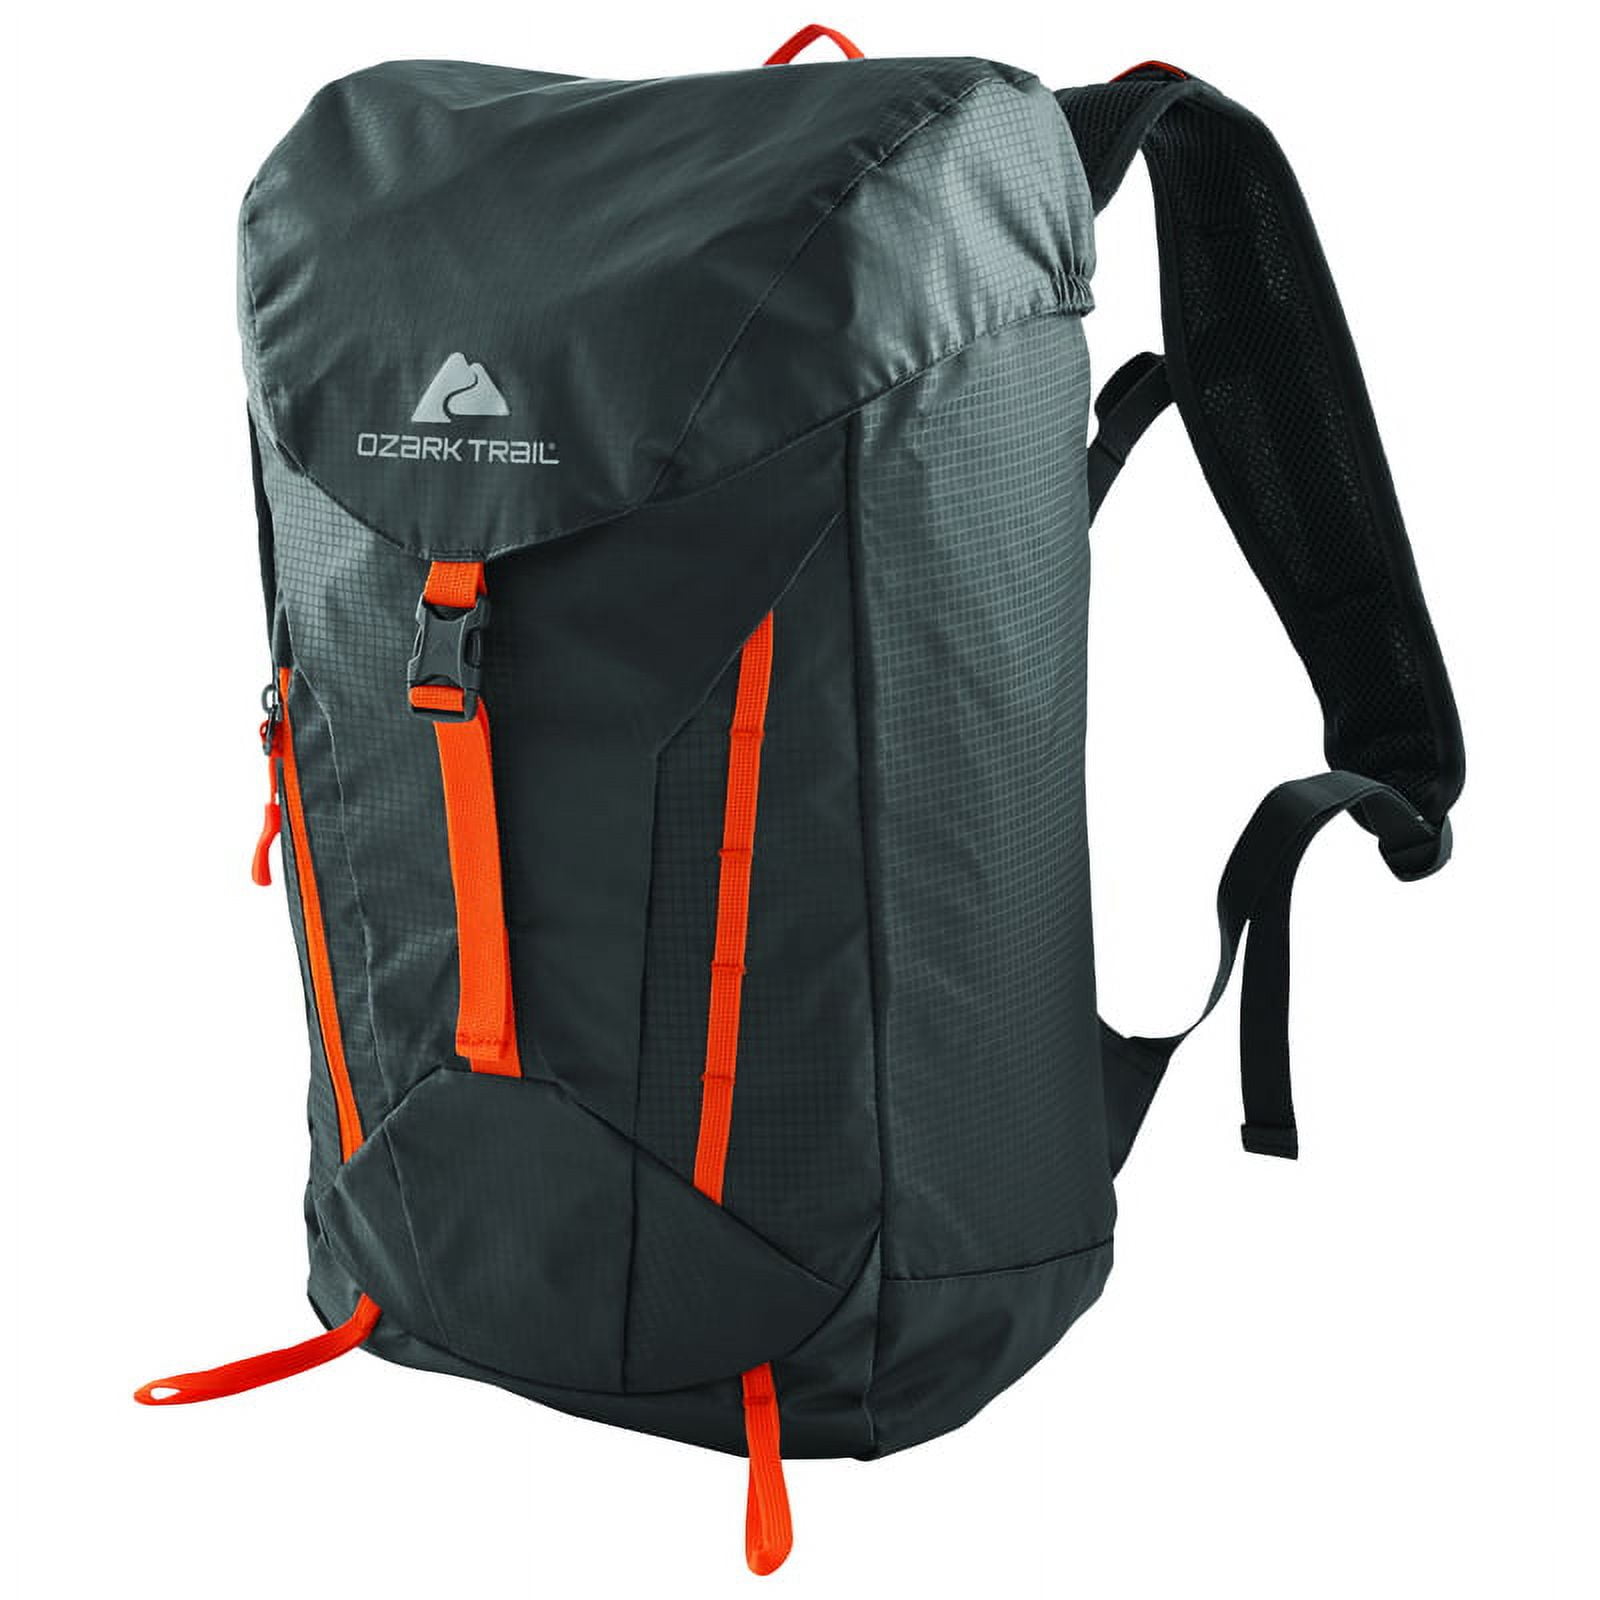 All Sport Backpack 28L, Unisex Bags,Purses,Wallets